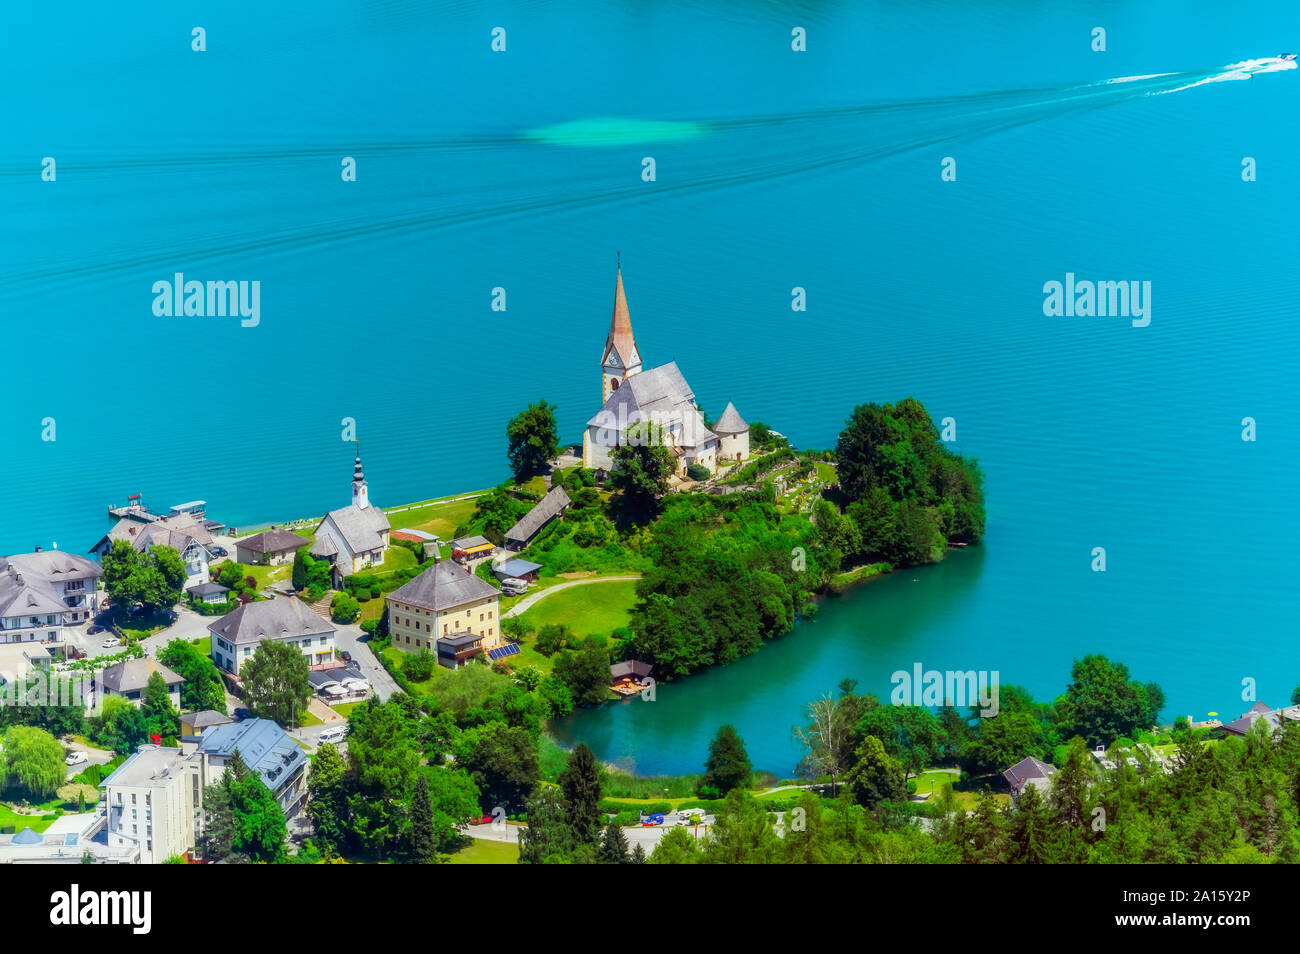 High angle view of church from Pyramidenkogel tower at Woerthersee Stock Photo